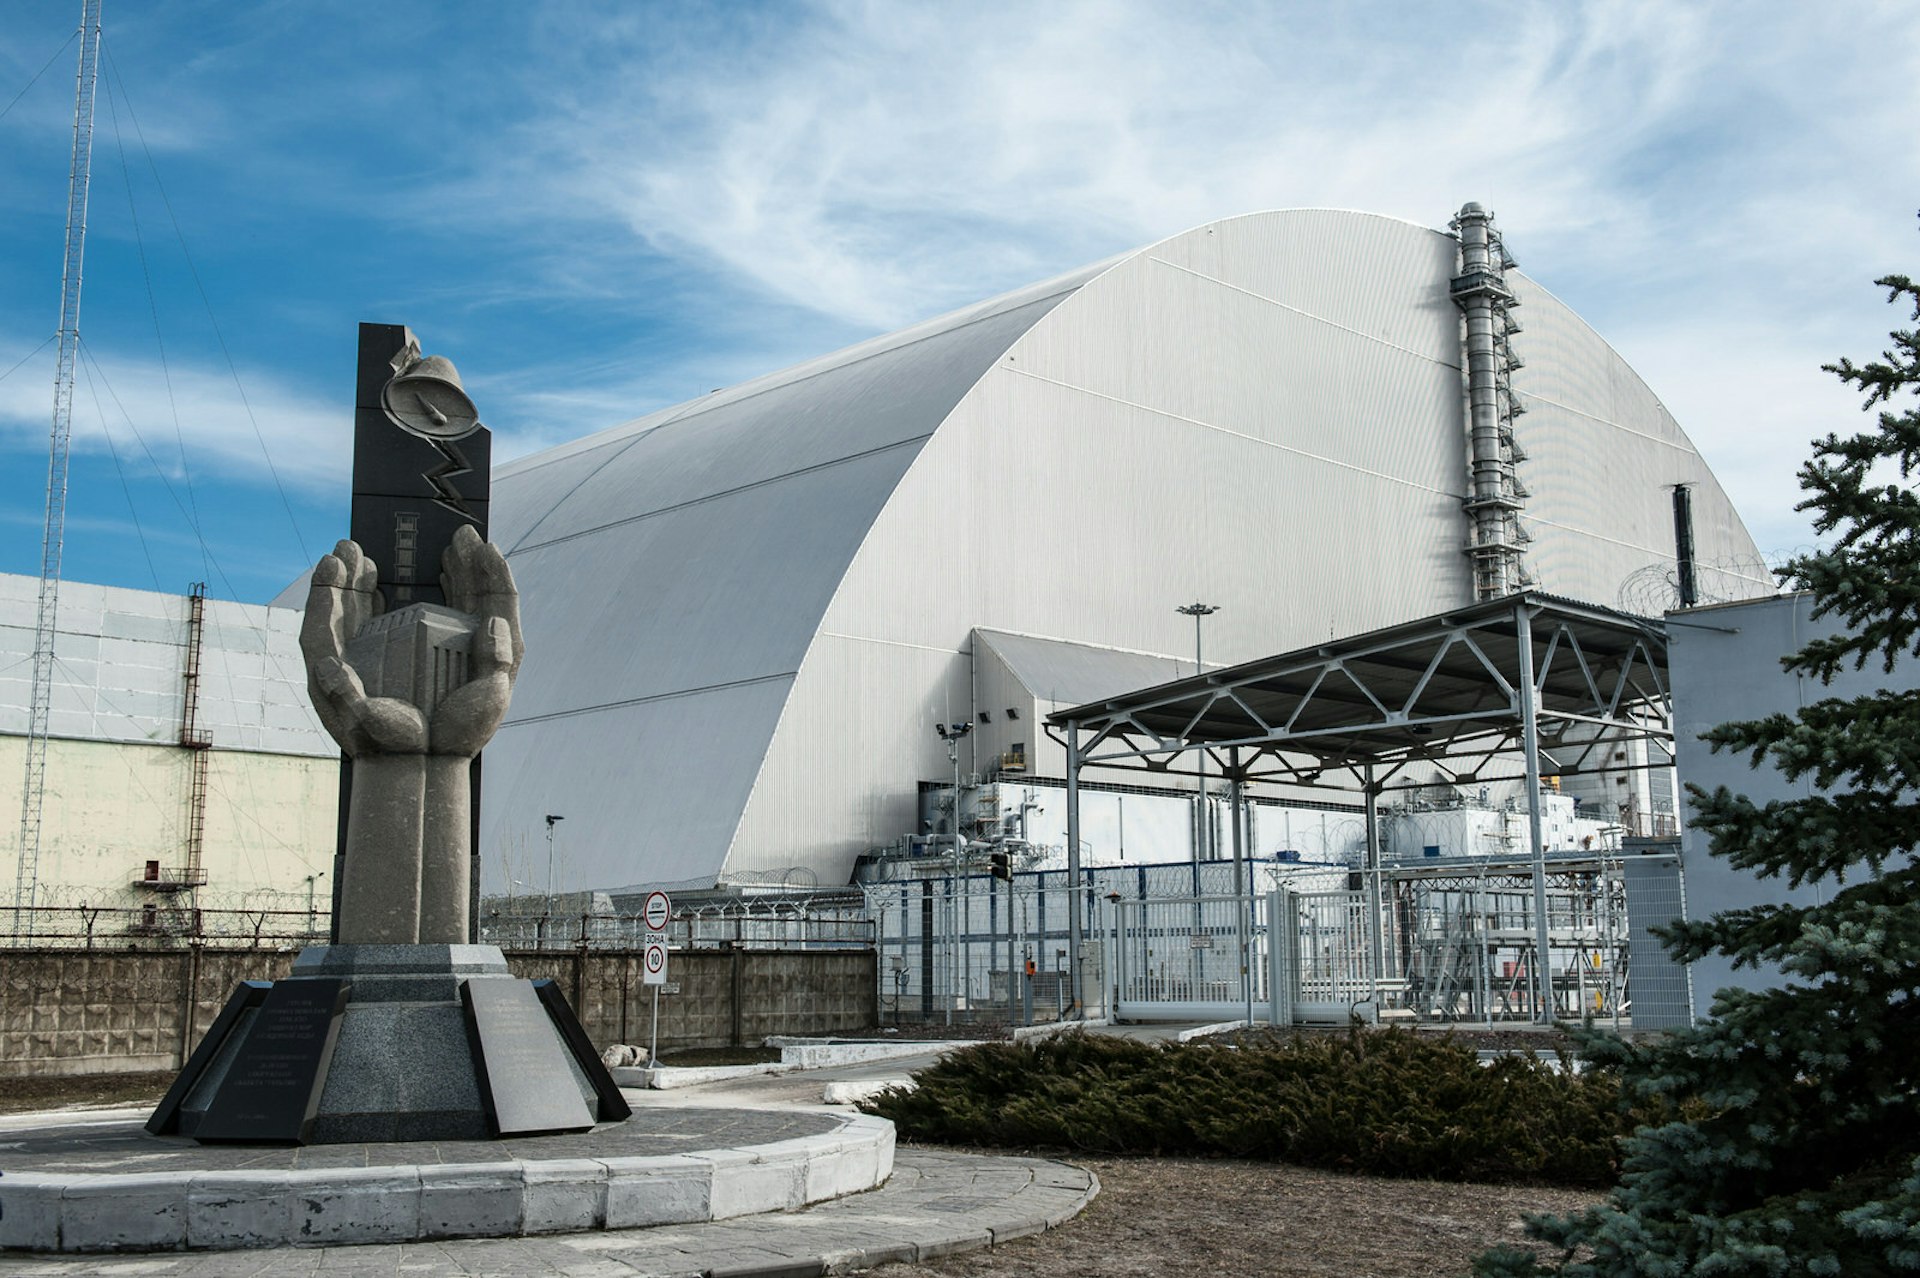 In the foreground is a concrete memorial to the Chernobyl disaster, depicting two hands cupped together around a miniature of Reactor 4; behind the memorial is the huge grey arch of the New Safe Confinement structure that encloses the remains of Reactor 4.